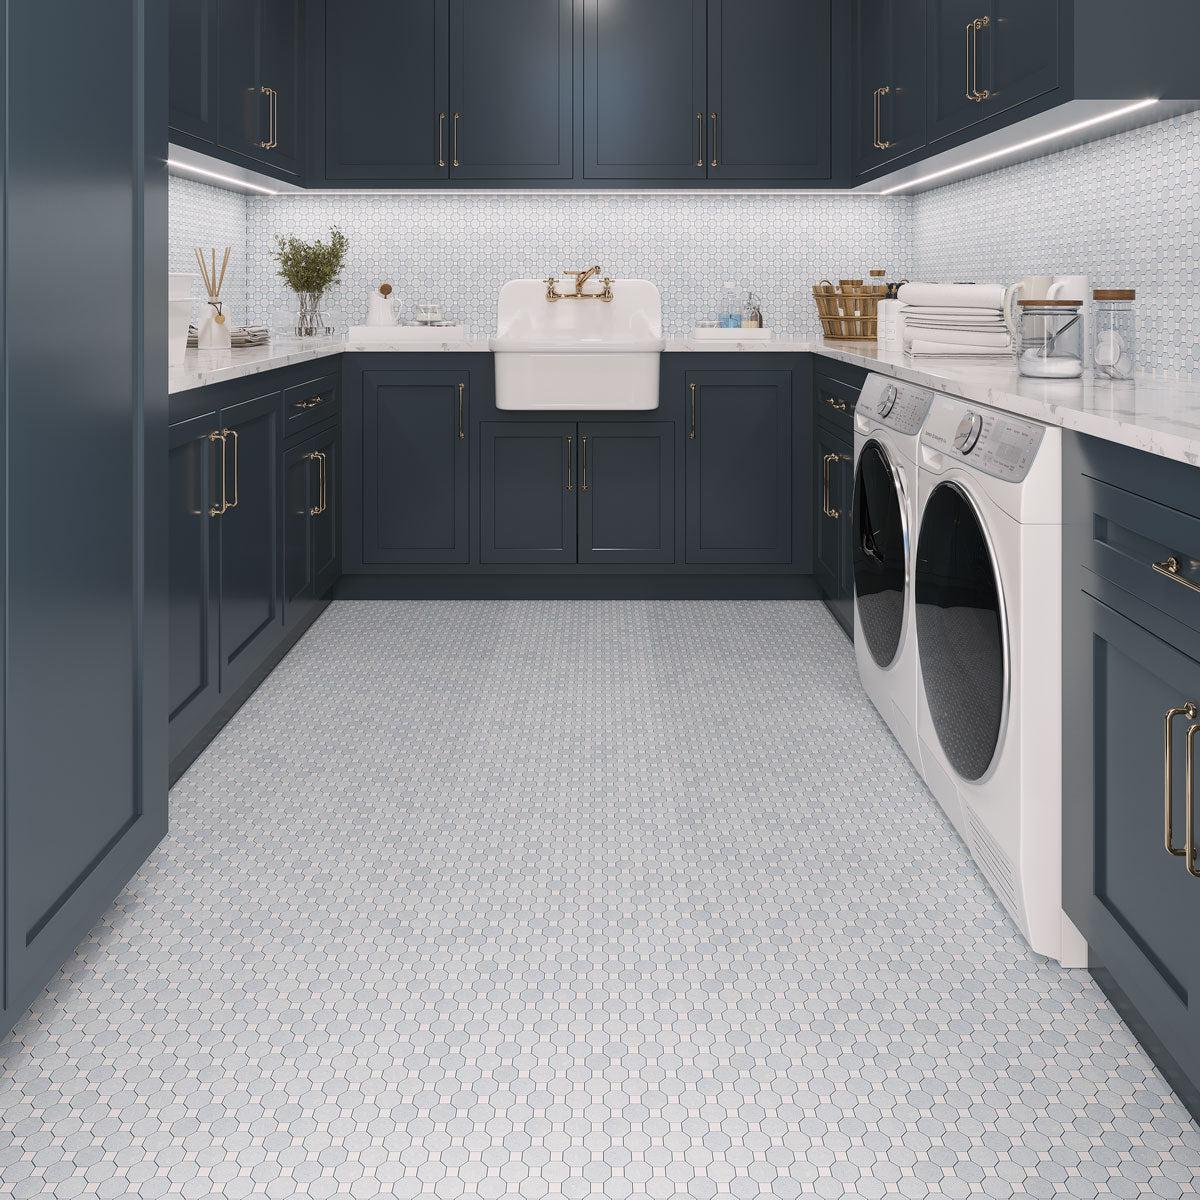 Blue and white Laundry Room with Azul Cielo Octagon And Thassos Dot Marble Mosaic Tile floors and walls